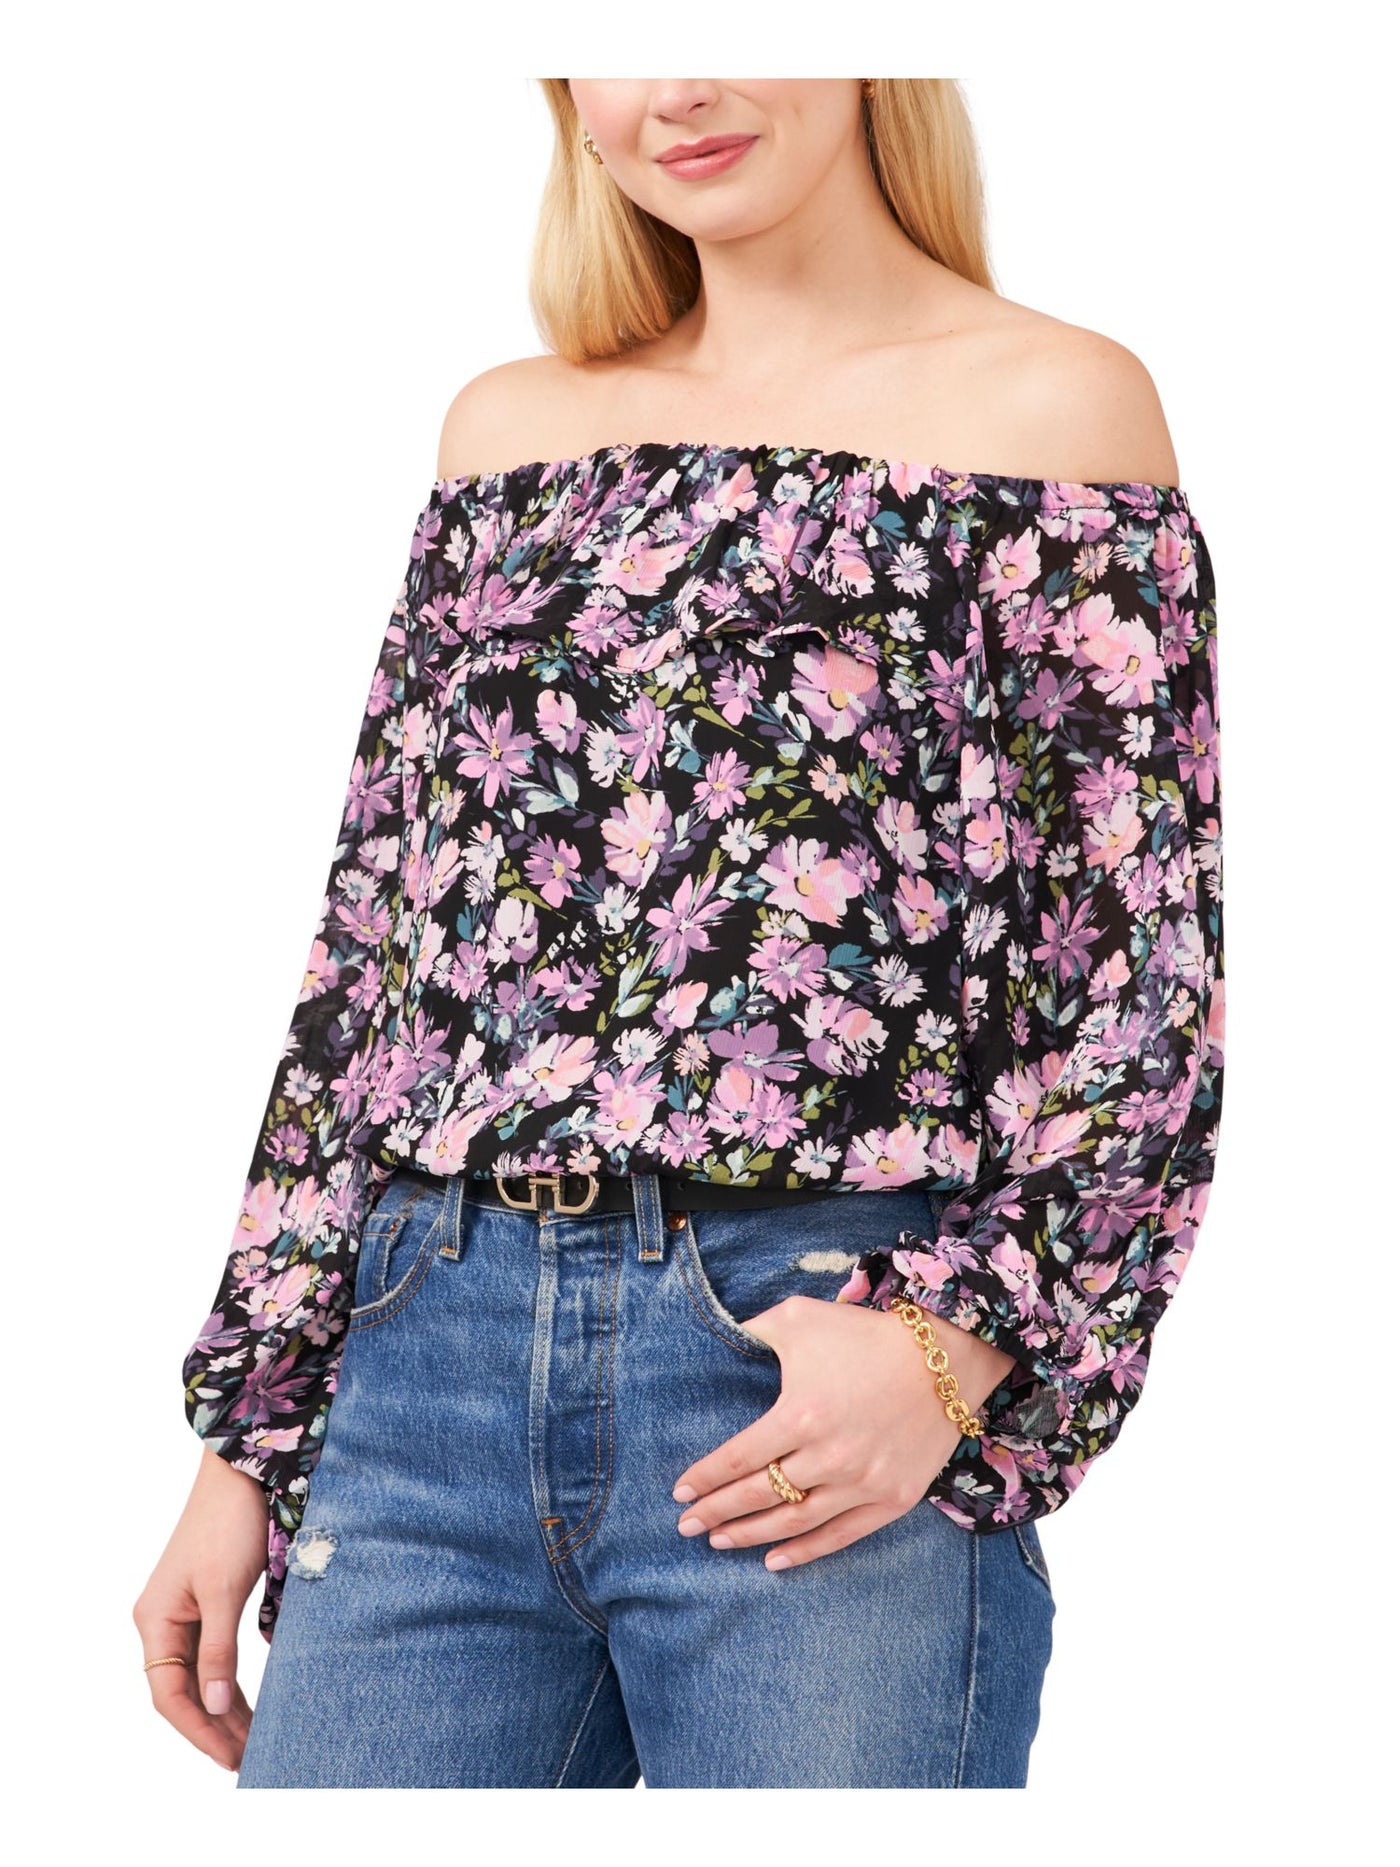 VINCE CAMUTO Womens Black Ruffled Pleated Elastic Trim Lined Floral Long Sleeve Off Shoulder Top XXS